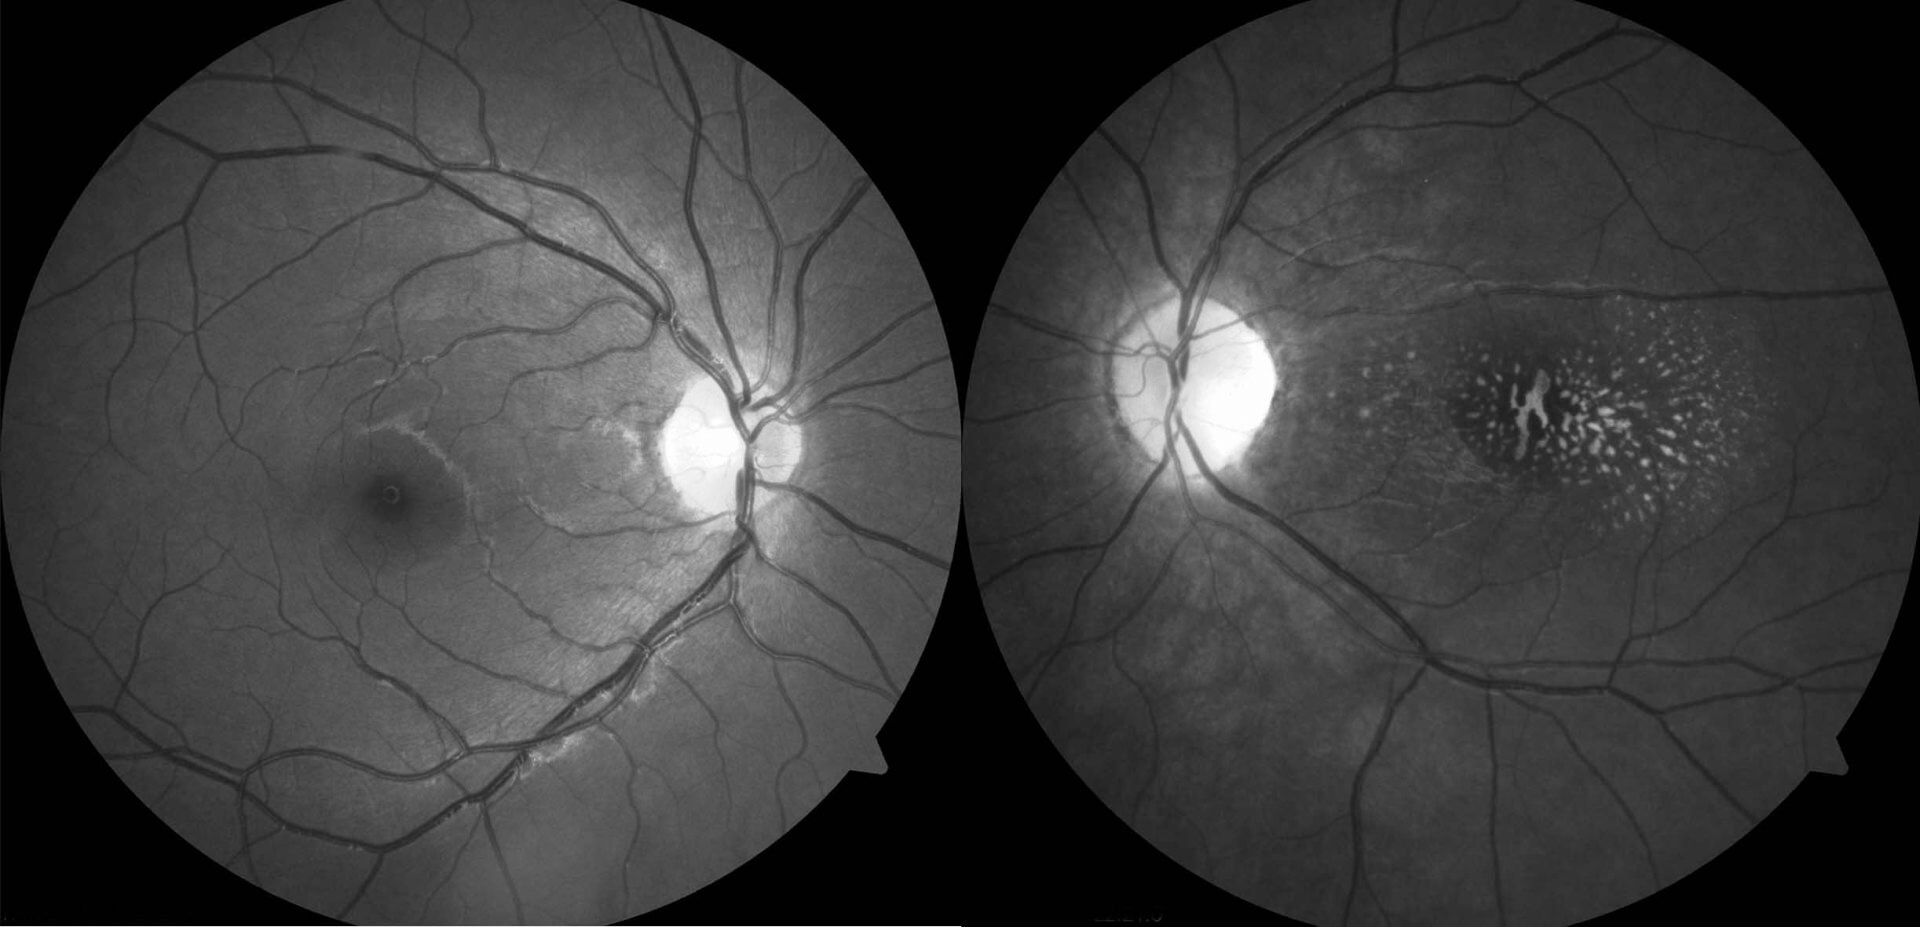 Indocyanine green angiography of the right eye demonstrates multiple hypofluorescent choroid lesions in a “birdshot” distribution in the posterior pole.